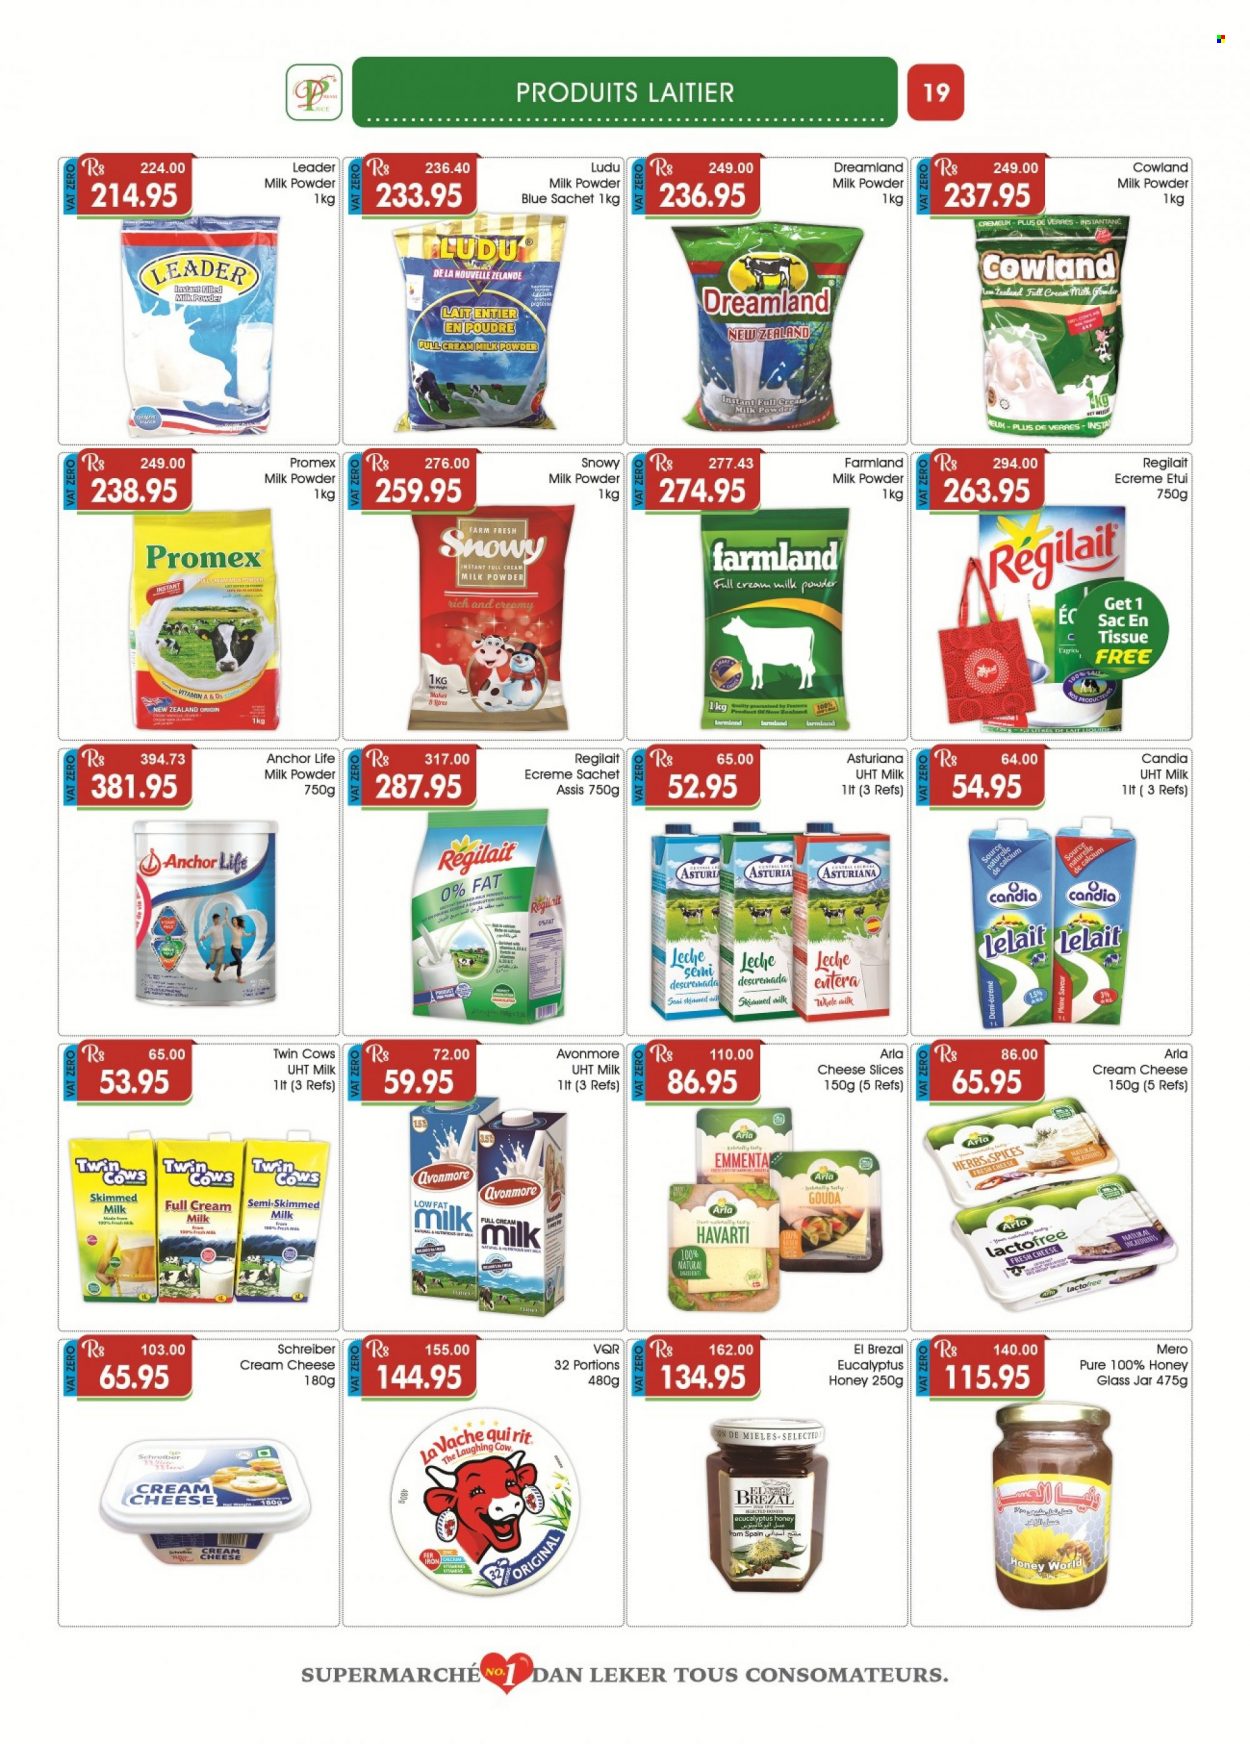 thumbnail - Dreamprice Catalogue - 19.08.2022 - 12.09.2022 - Sales products - cream cheese, gouda, sliced cheese, Havarti, cheese, The Laughing Cow, Arla, milk powder, butter, Anchor, herbs, honey, tissues, jar, calcium. Page 19.